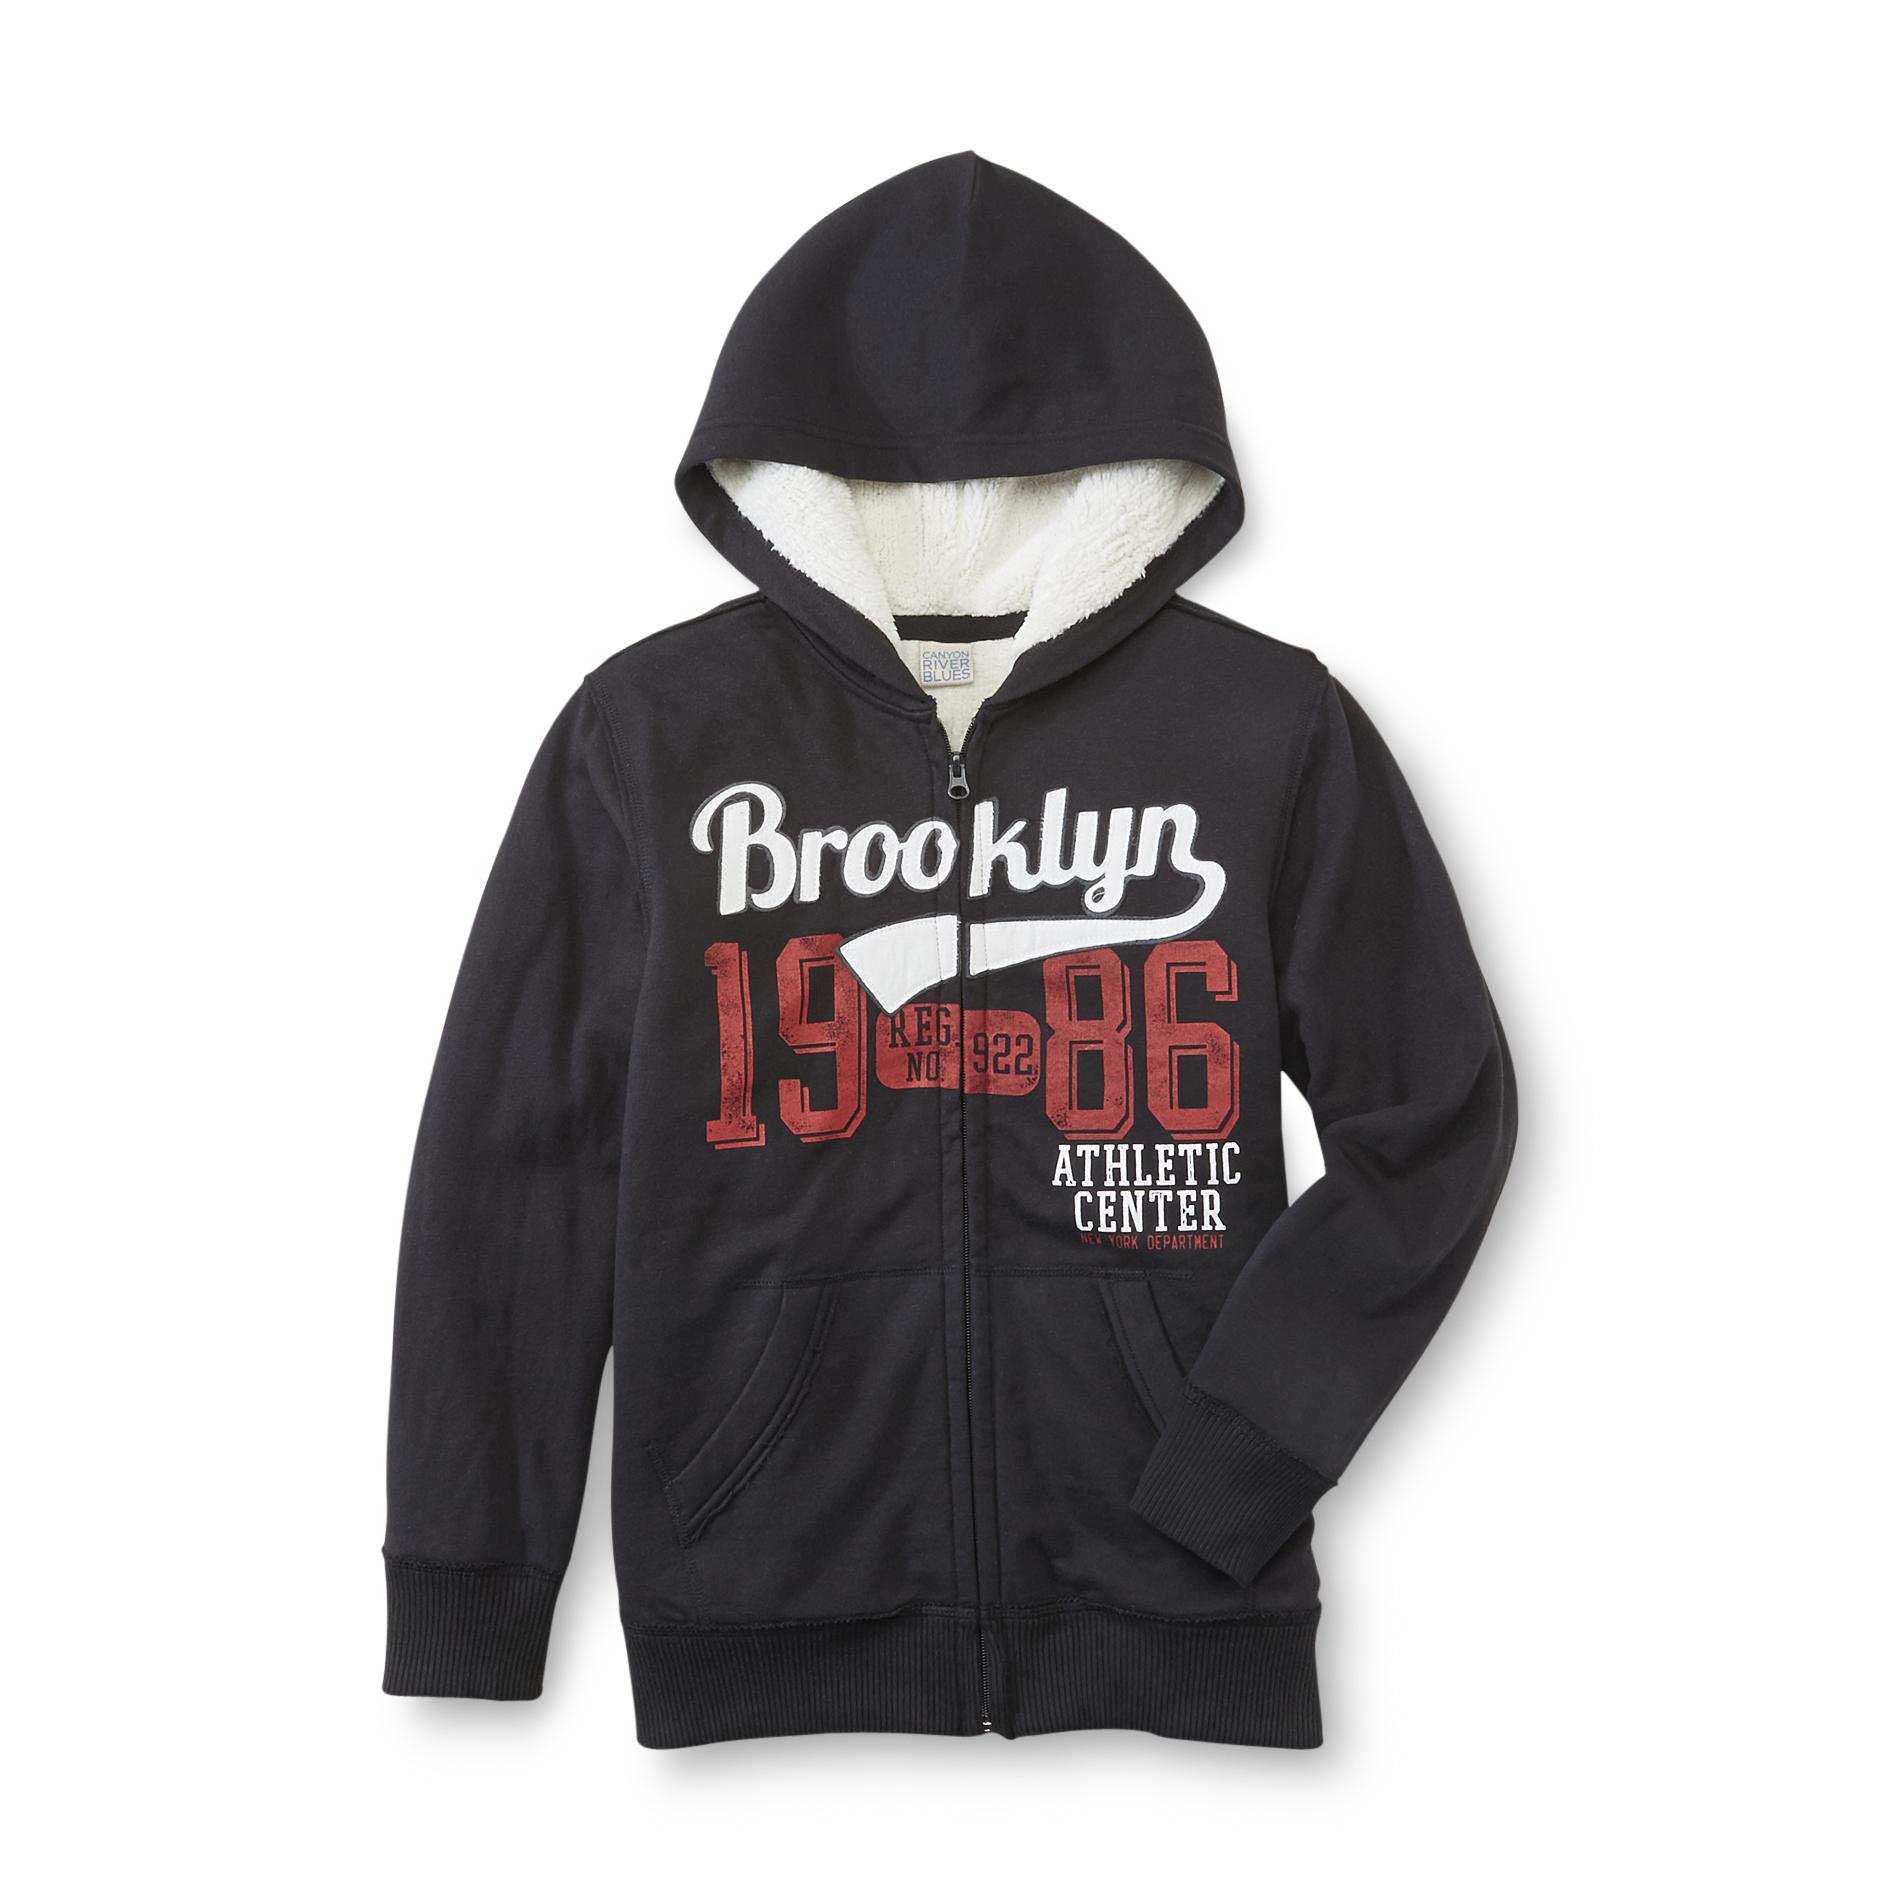 Canyon River Blues Boy's Graphic Hoodie Jacket - Brooklyn